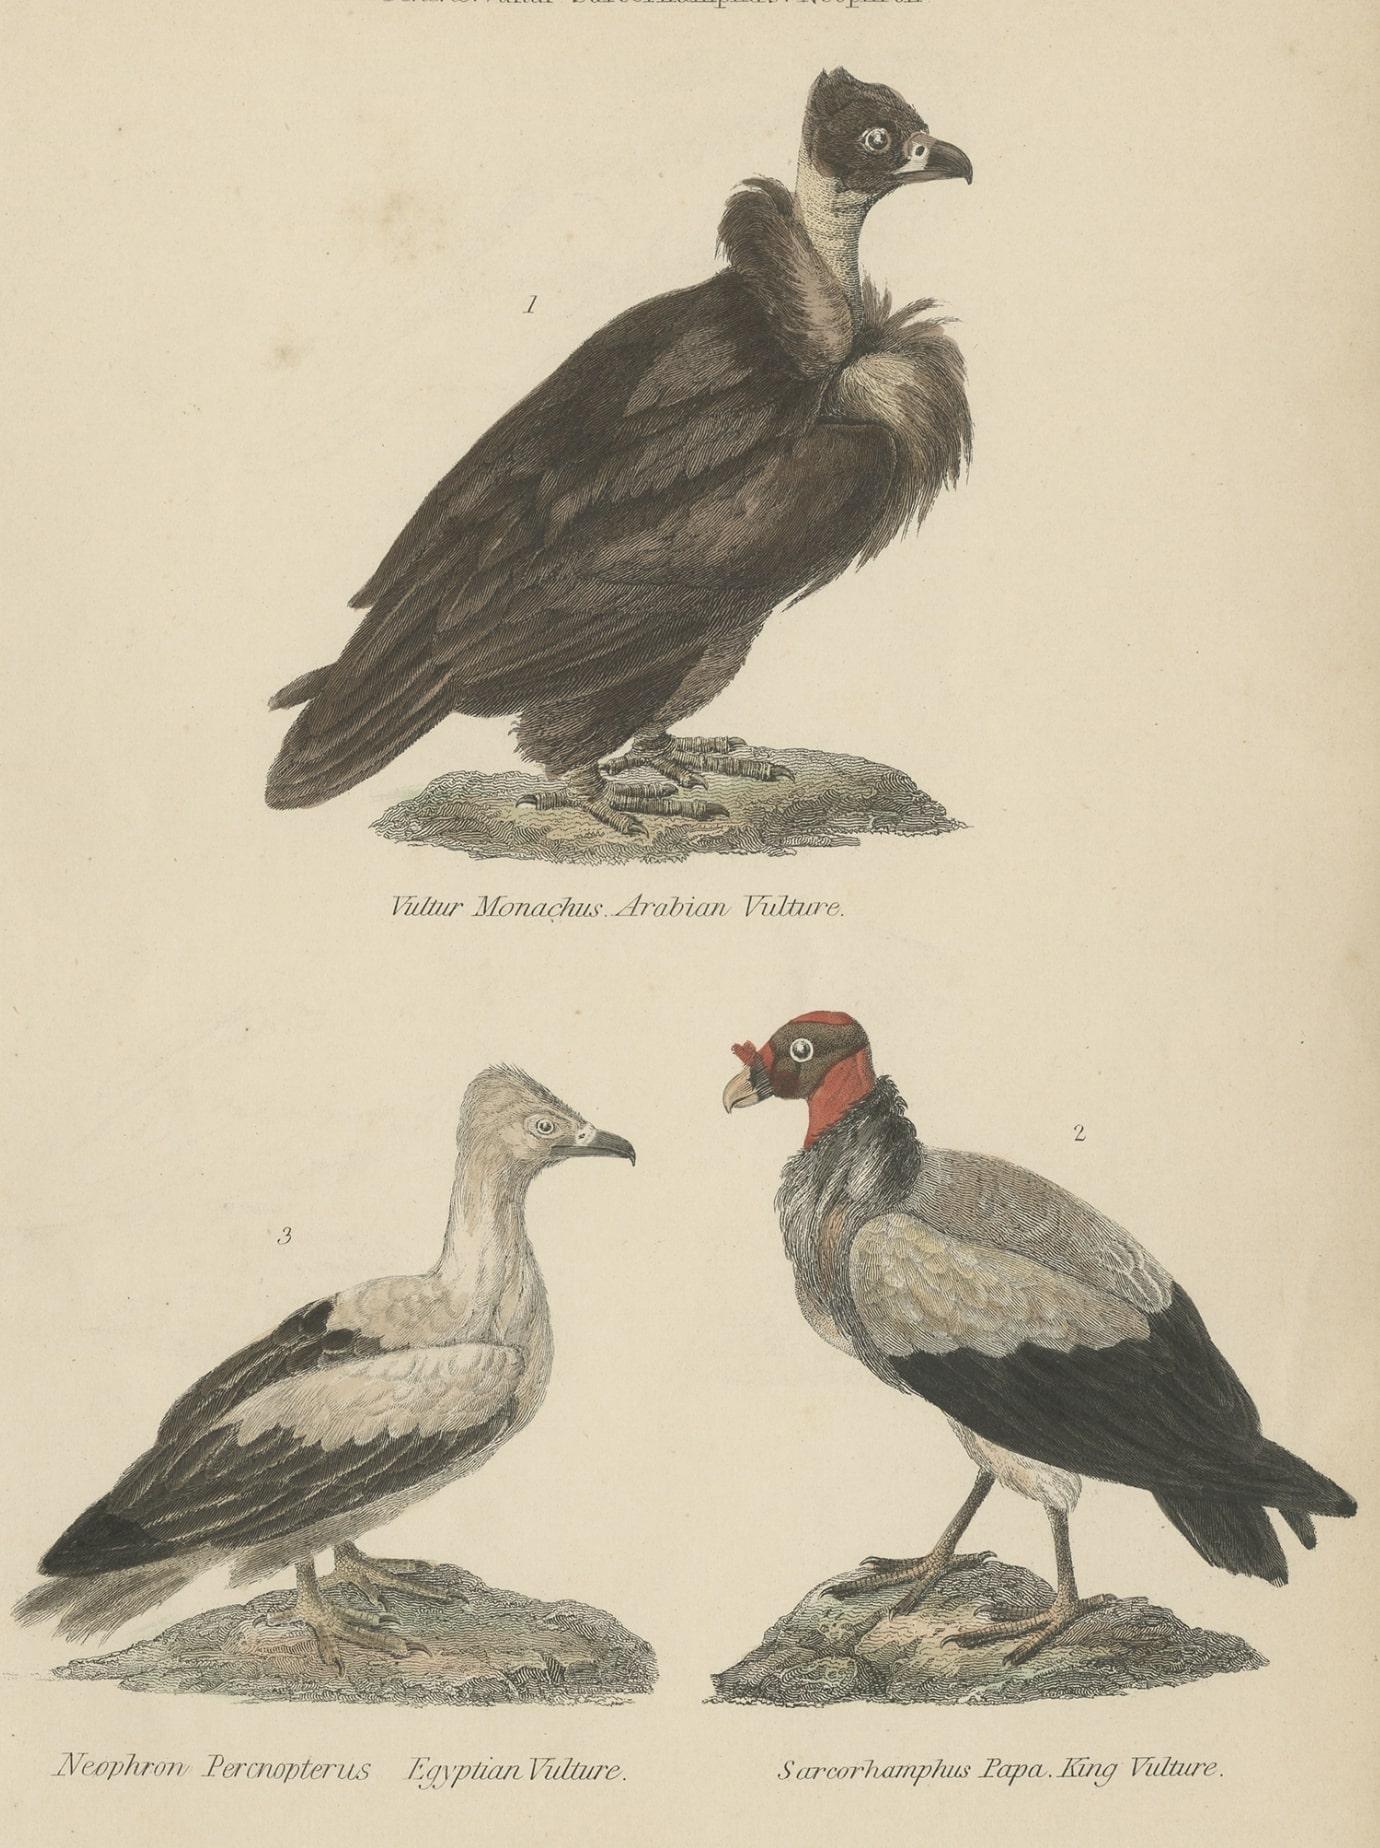 Antique bird print depicting the Arabian vulture, Egyptian vulture and king vulture. 

This print originates from 'Museum of Natural History' by Sir John Richardson.

Artists and Engravers: Published by William Mackenzie.

Condition: Very